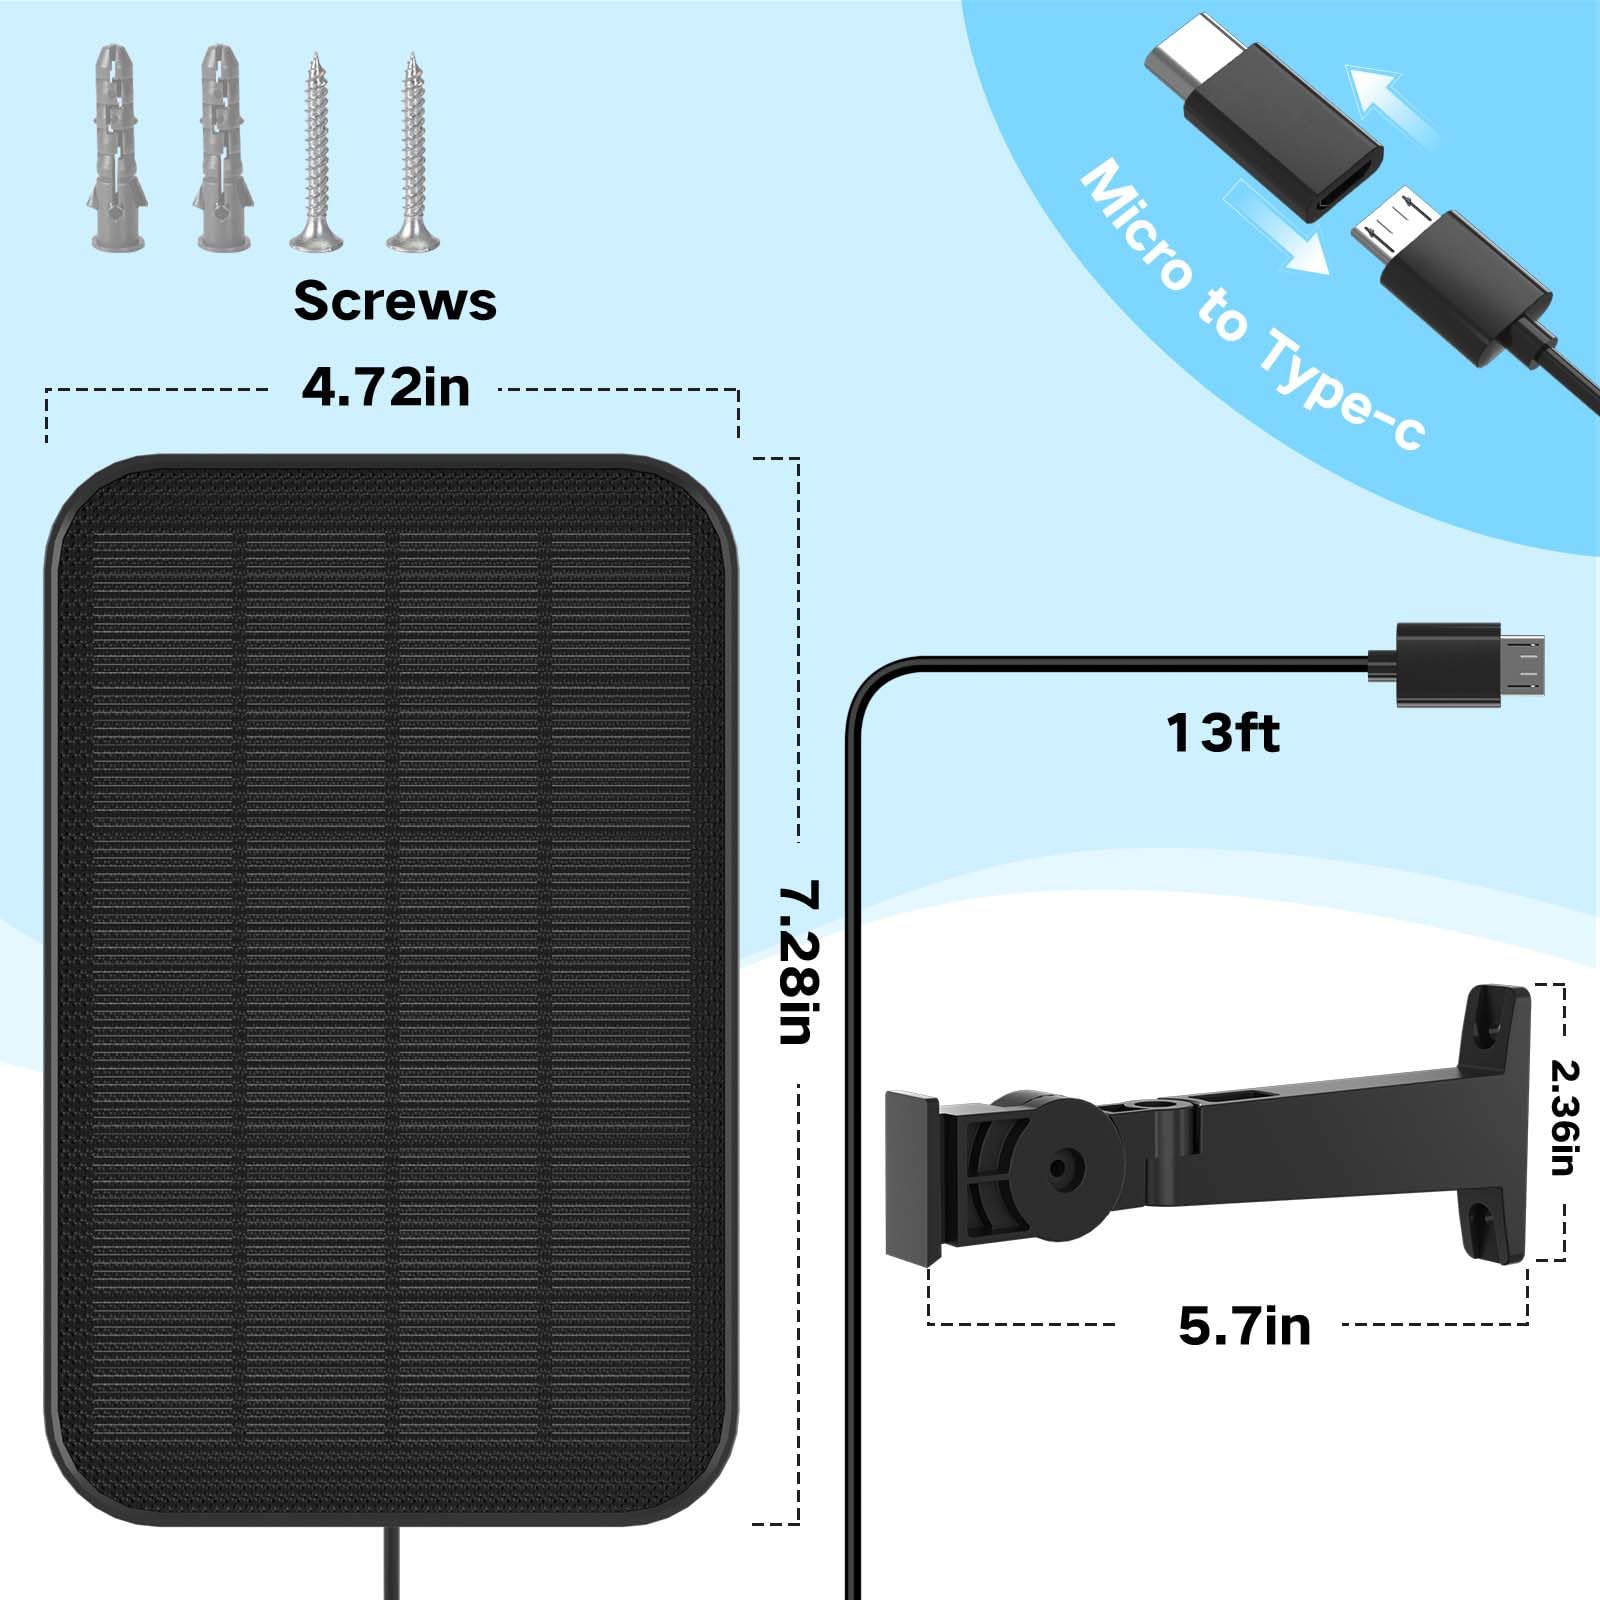 VIRTAVO Solar Panel Compatible with VIRTAVO Cam, Waterproof Solar Charger, Security Certified Continuous Power Supply,with 13ft Cable Micro USB Port & Type-C Adapter,360° Adjustable Bracket